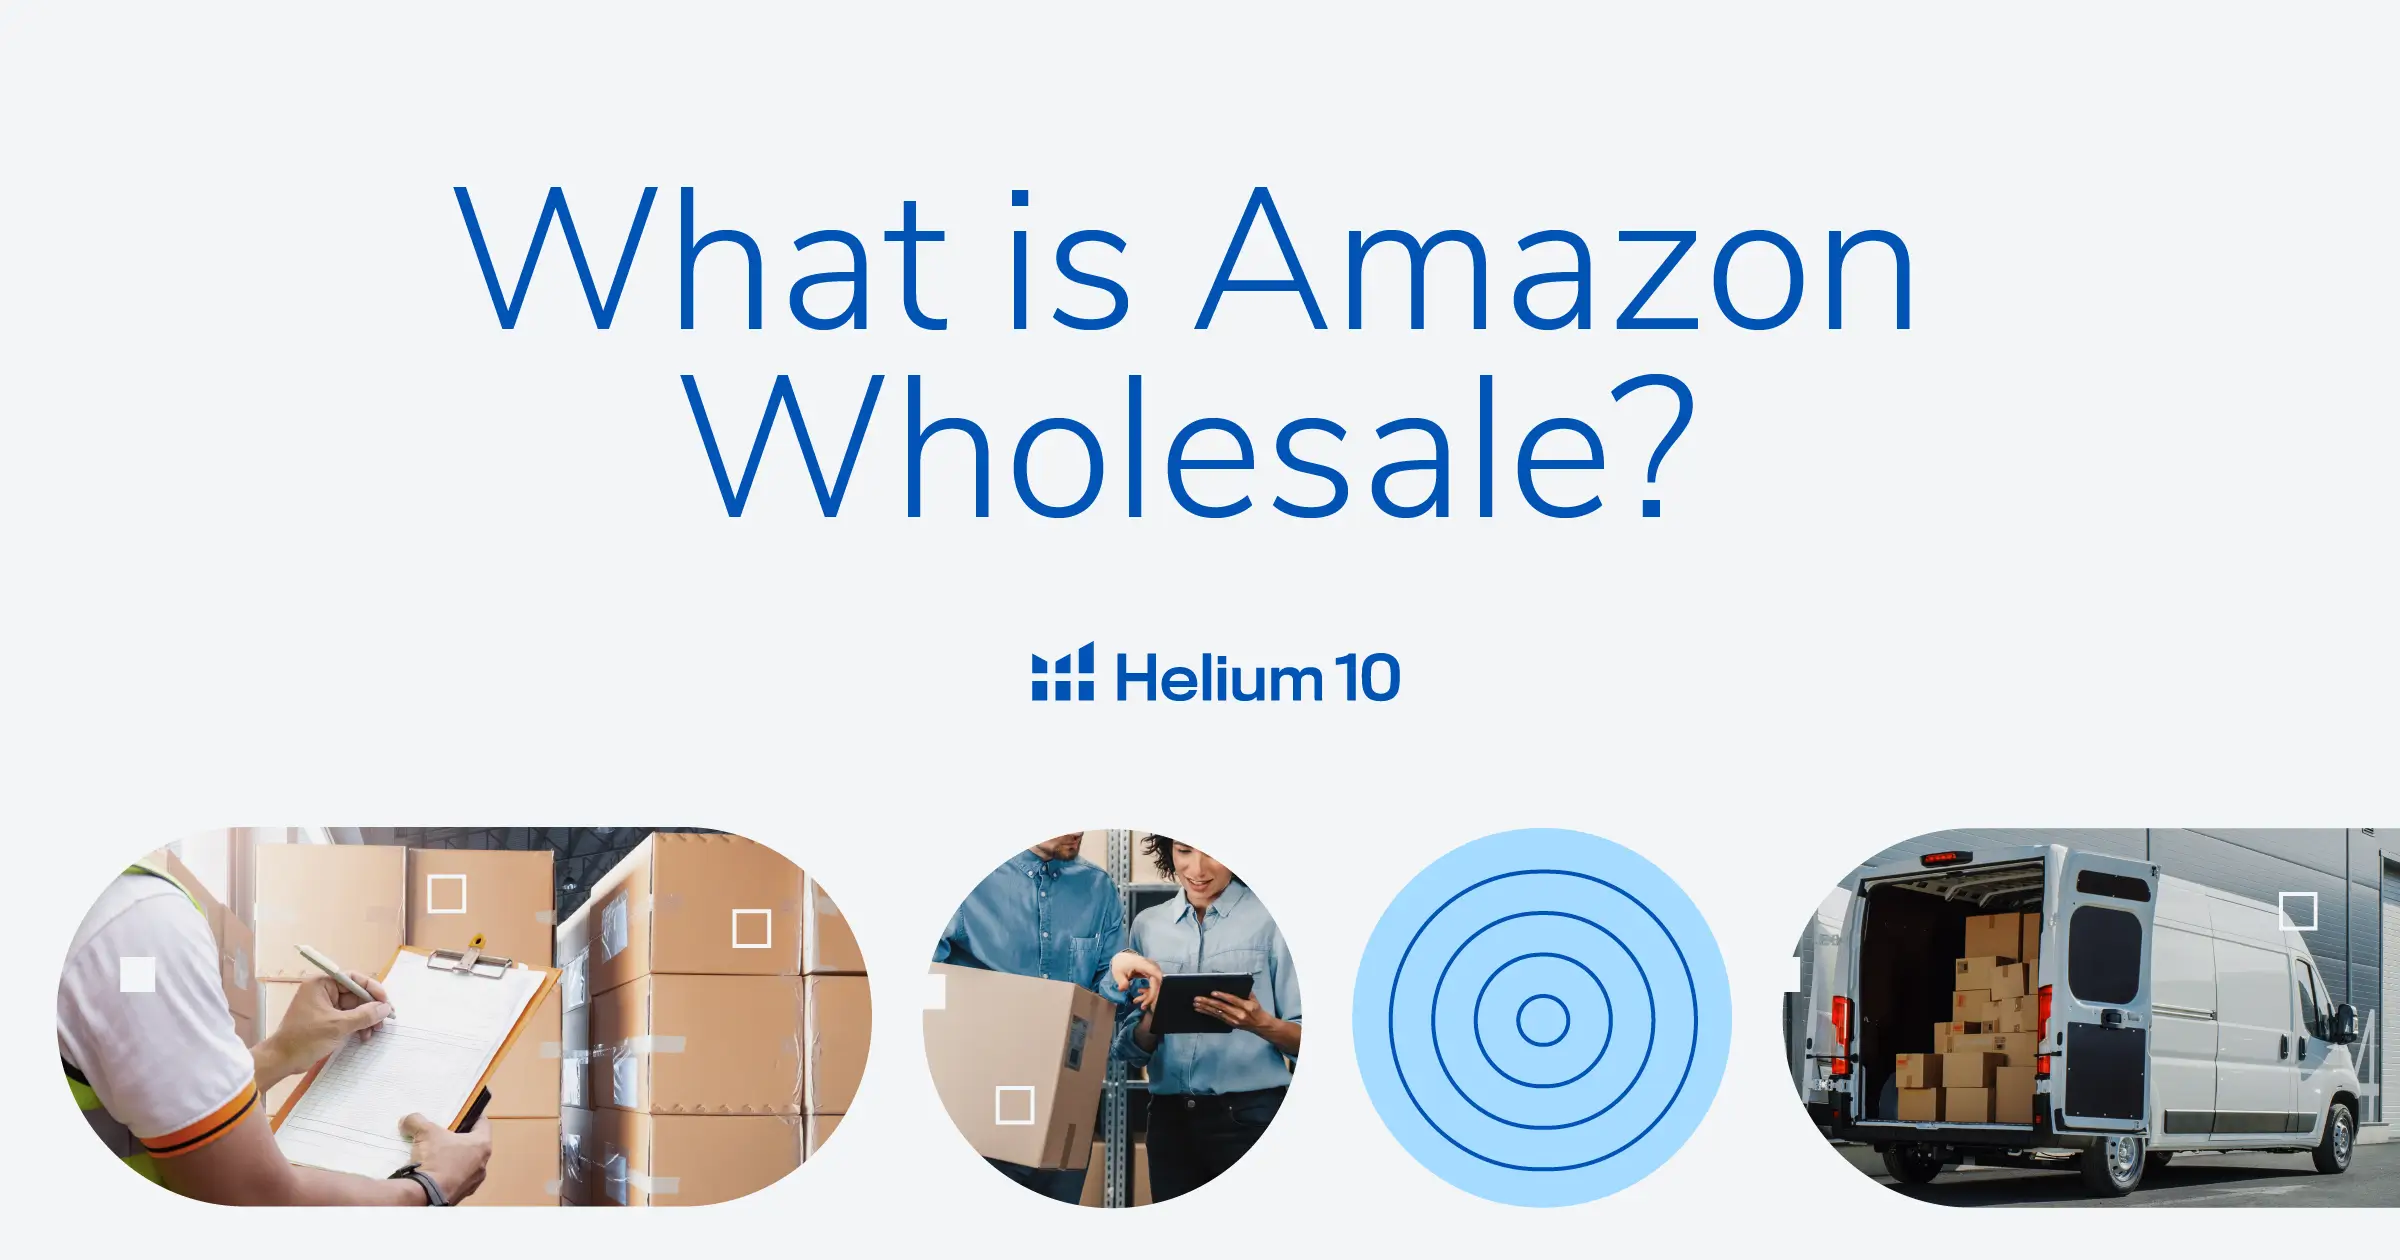 Tools to Help You Find Wholesale Products to Sell on Amazon